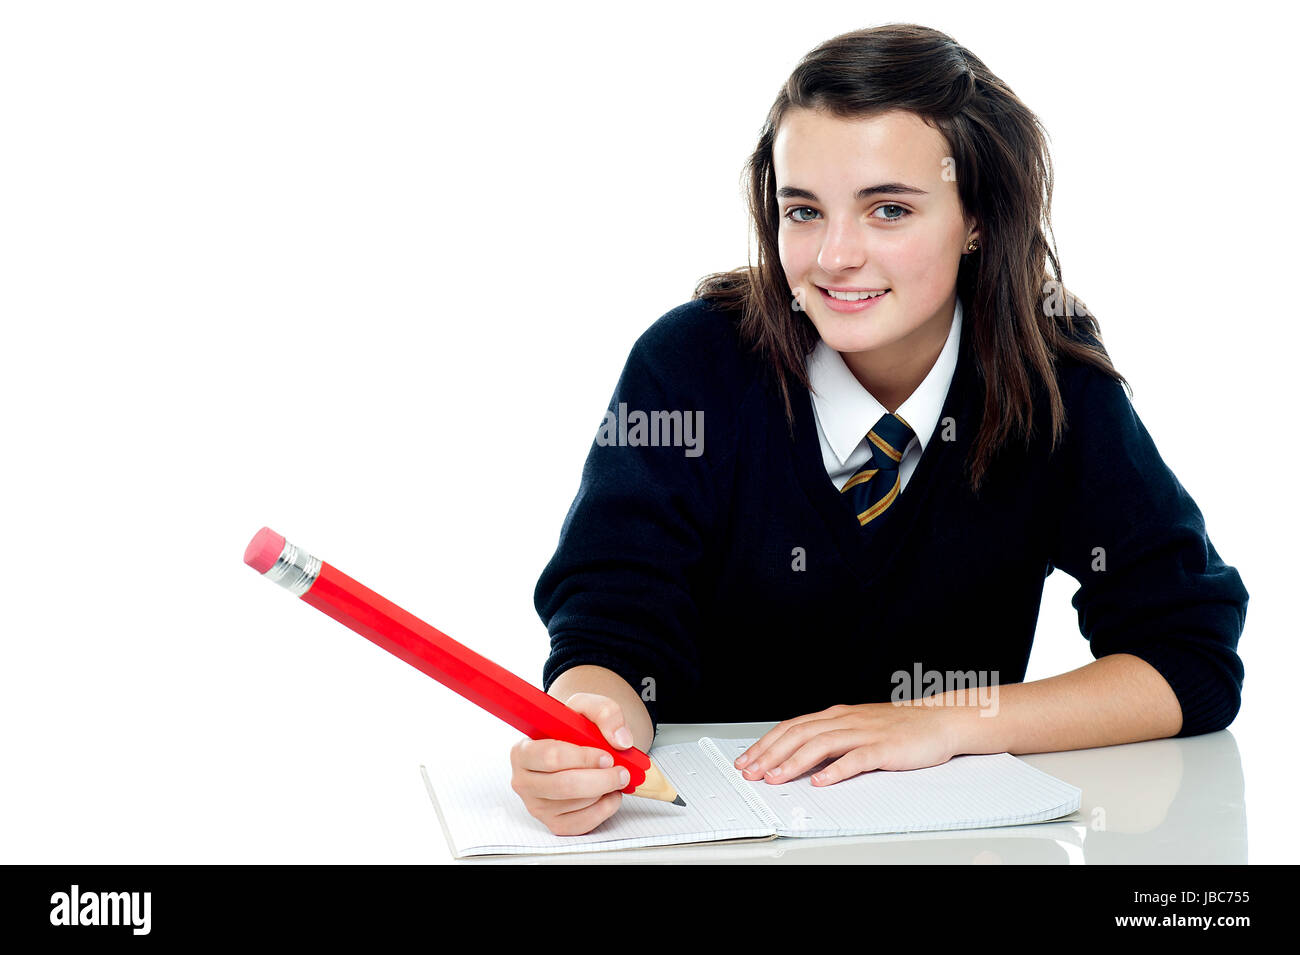 Confident school girl is ready to take up the test. Holding big red pencil Stock Photo